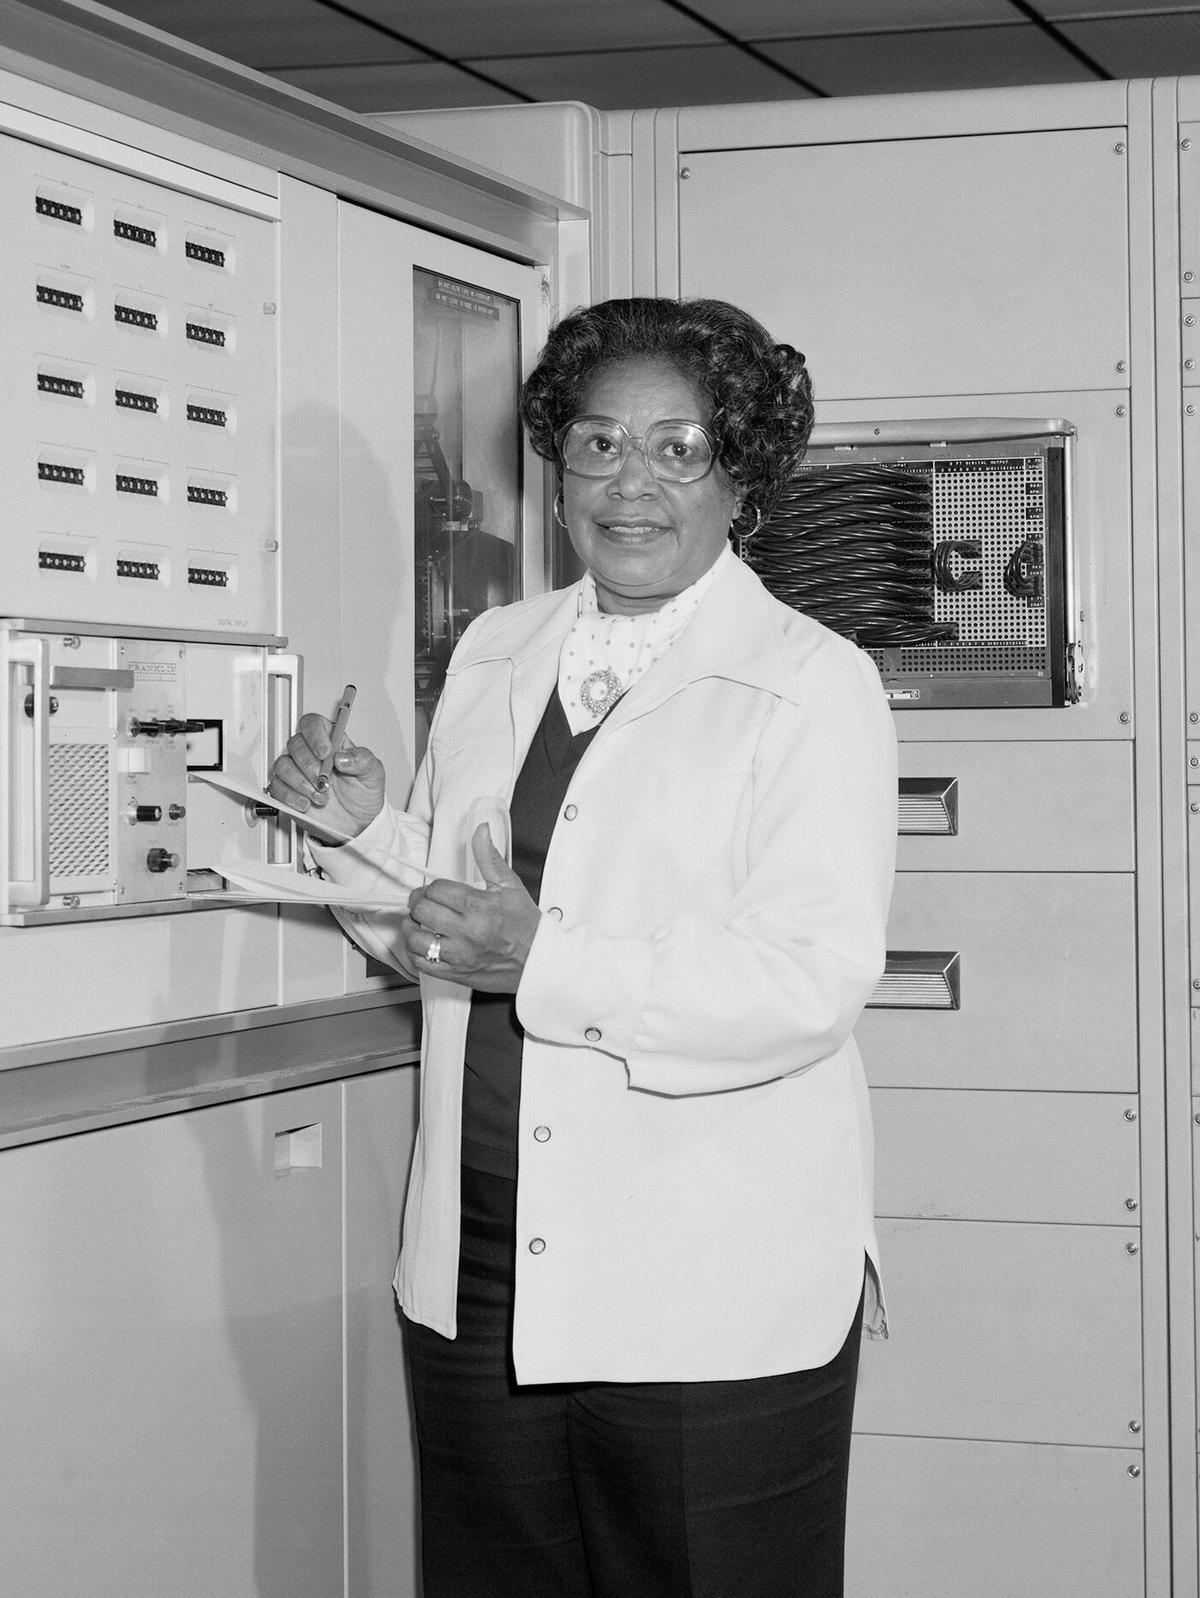 Jackson working at NASA's Langley Research Center in Hampton, Virginia, on June 2, 1977 (<a href="https://commons.wikimedia.org/wiki/File:Mary_Jackson_working.jpg">NASA</a>)